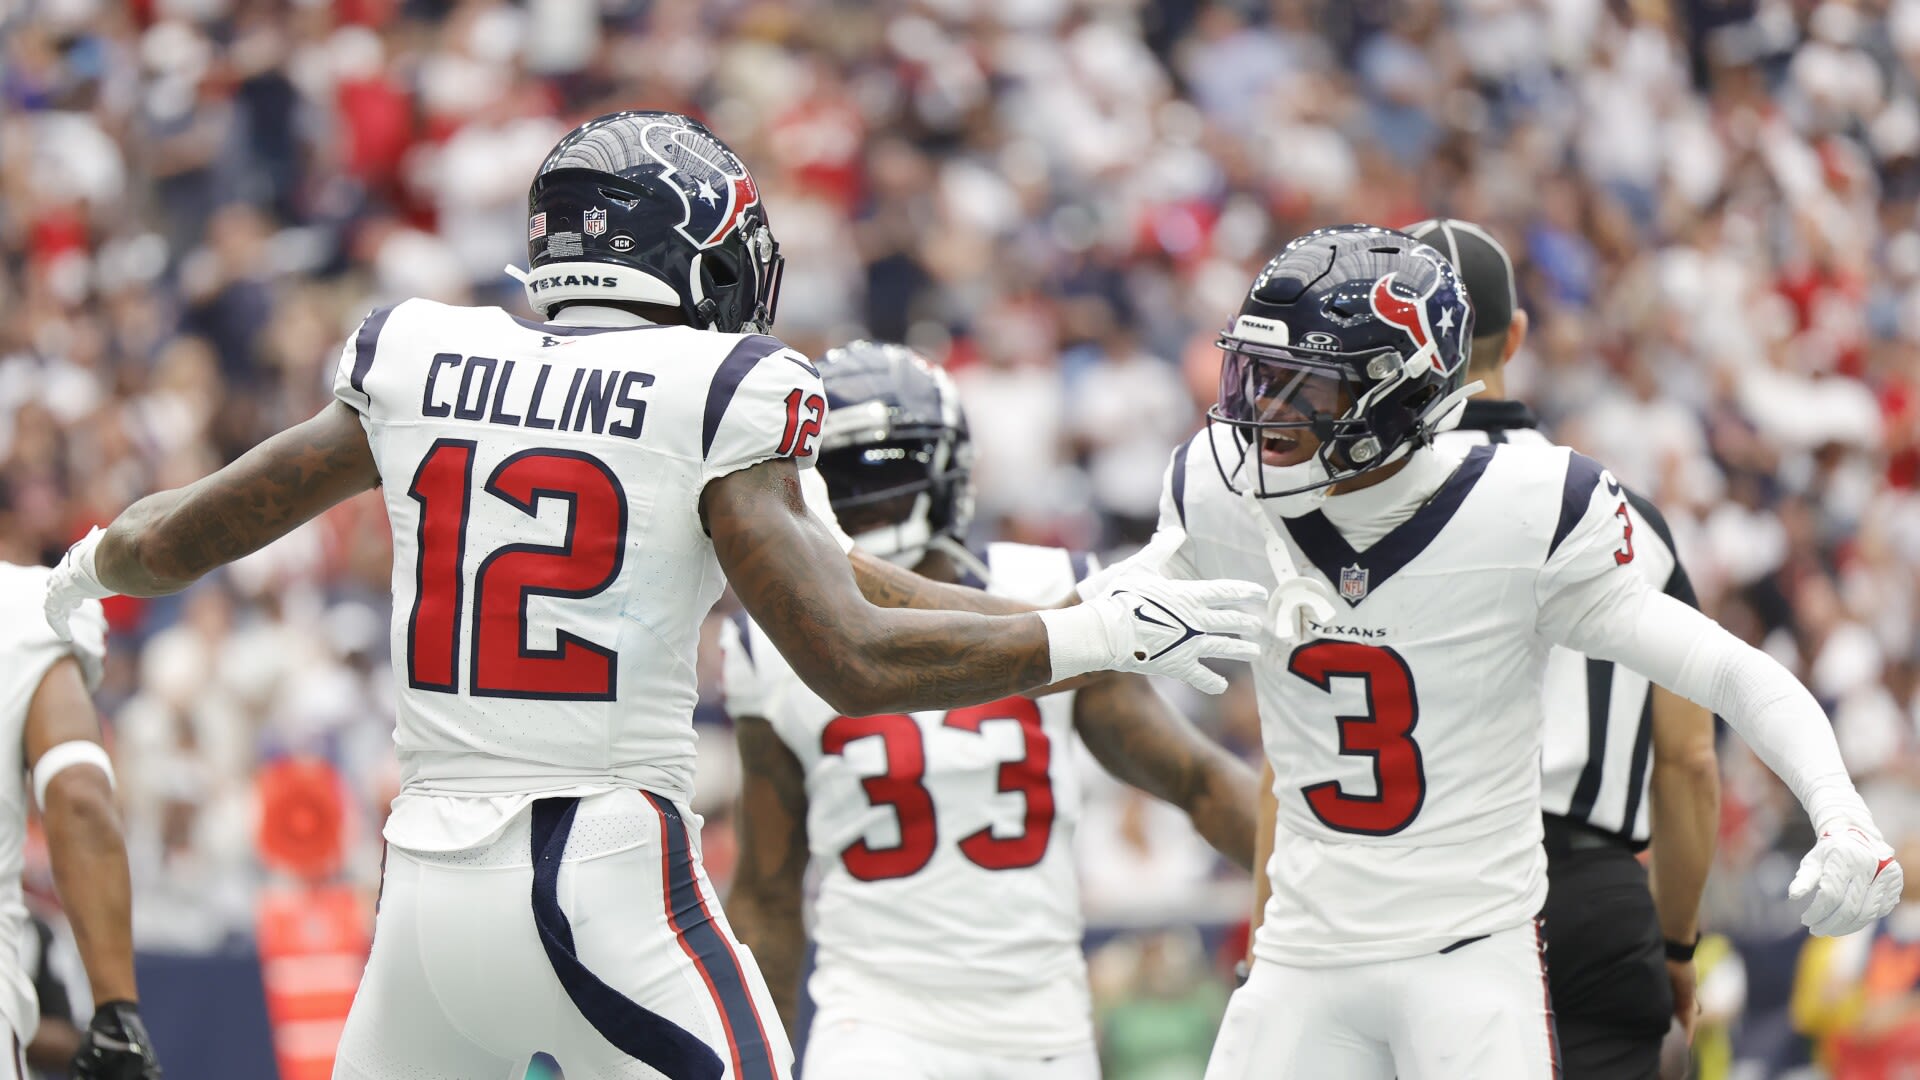 DeMeco Ryans says opposing defenses will struggle to stop Texans' top three receivers